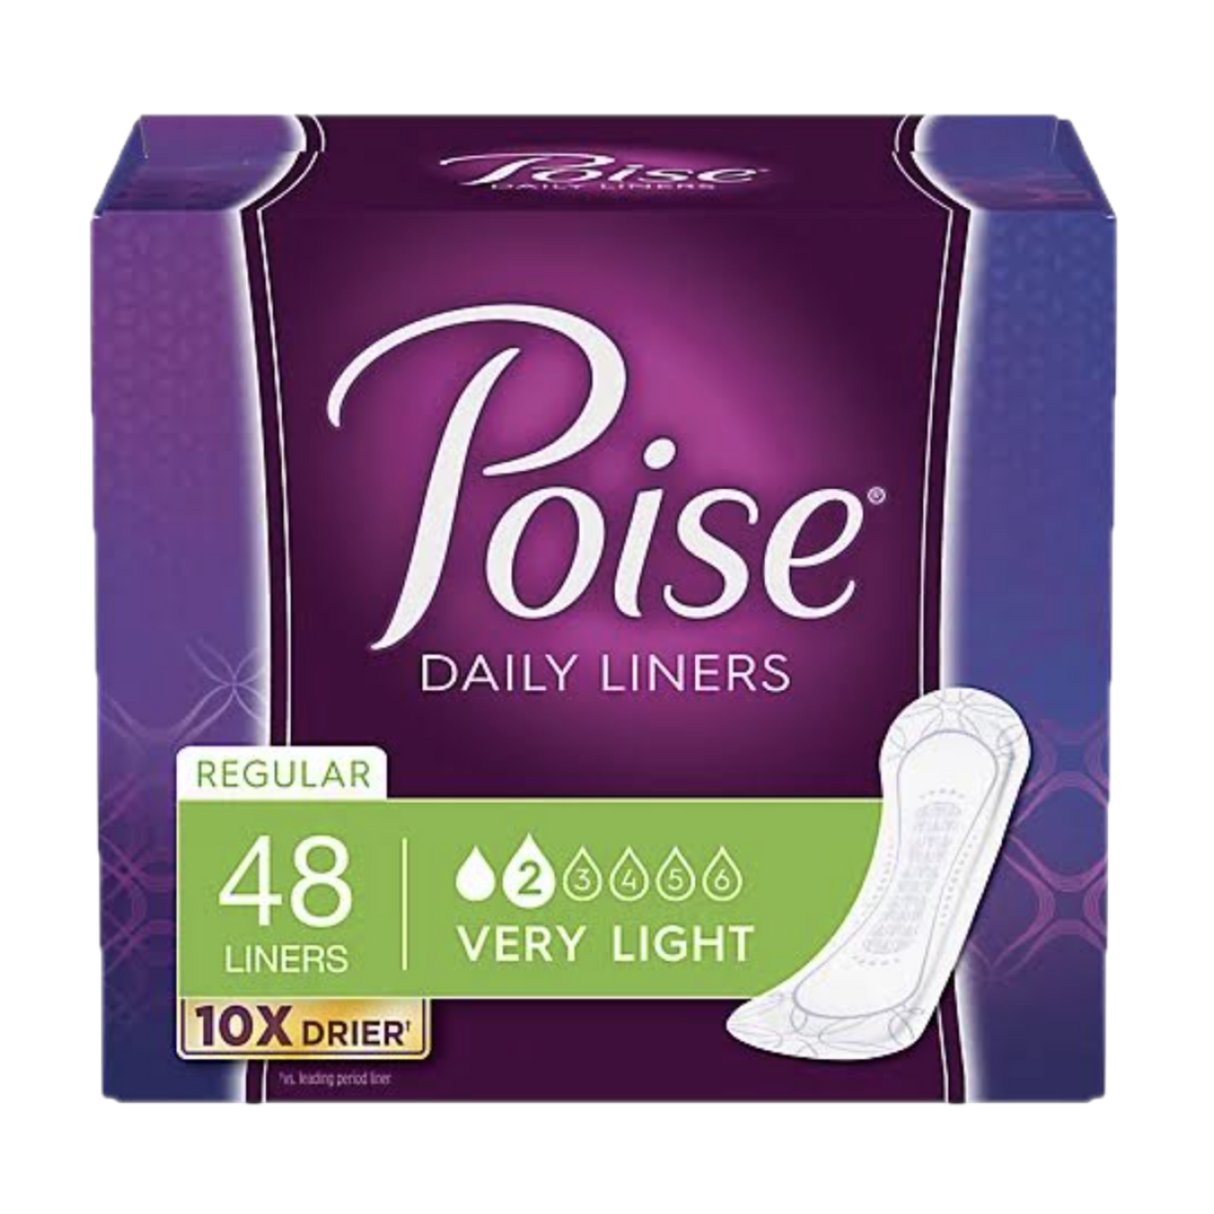 Poise Daily Liners Packaging. 48 Regular Liners, very light. 10X Drier. 